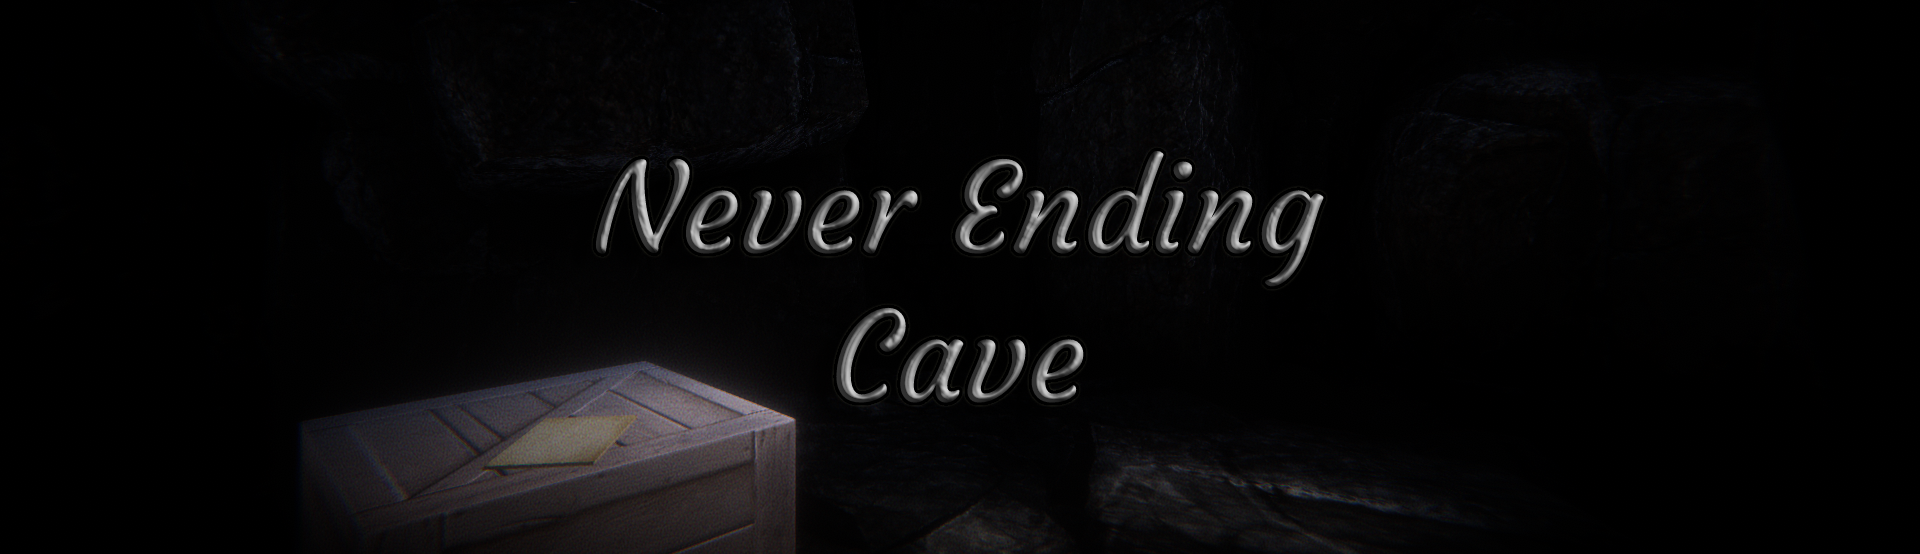 Never Ending Cave